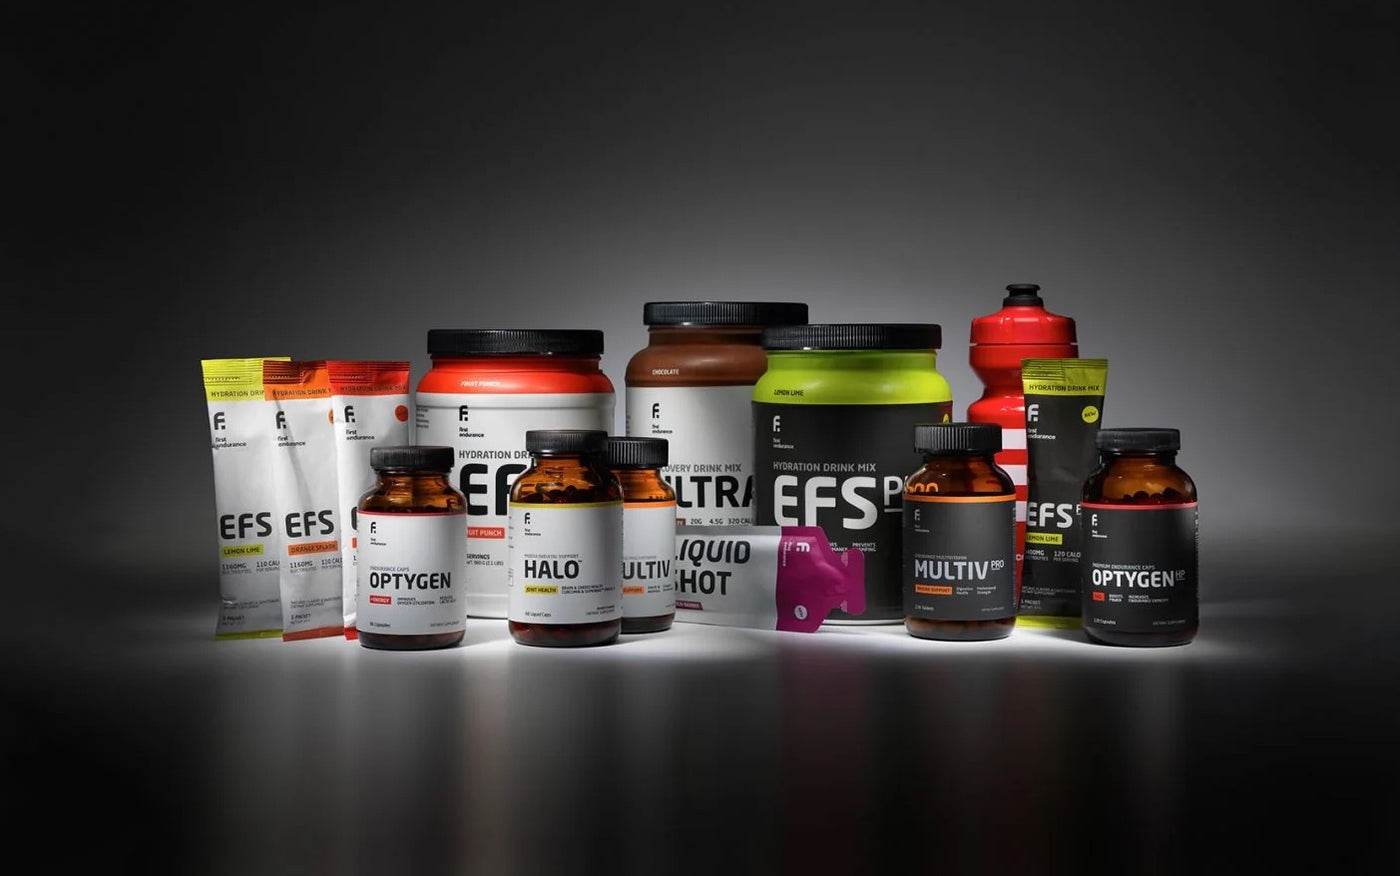 First Endurance supplement products featuring optygen, hale, ultimate, multiv